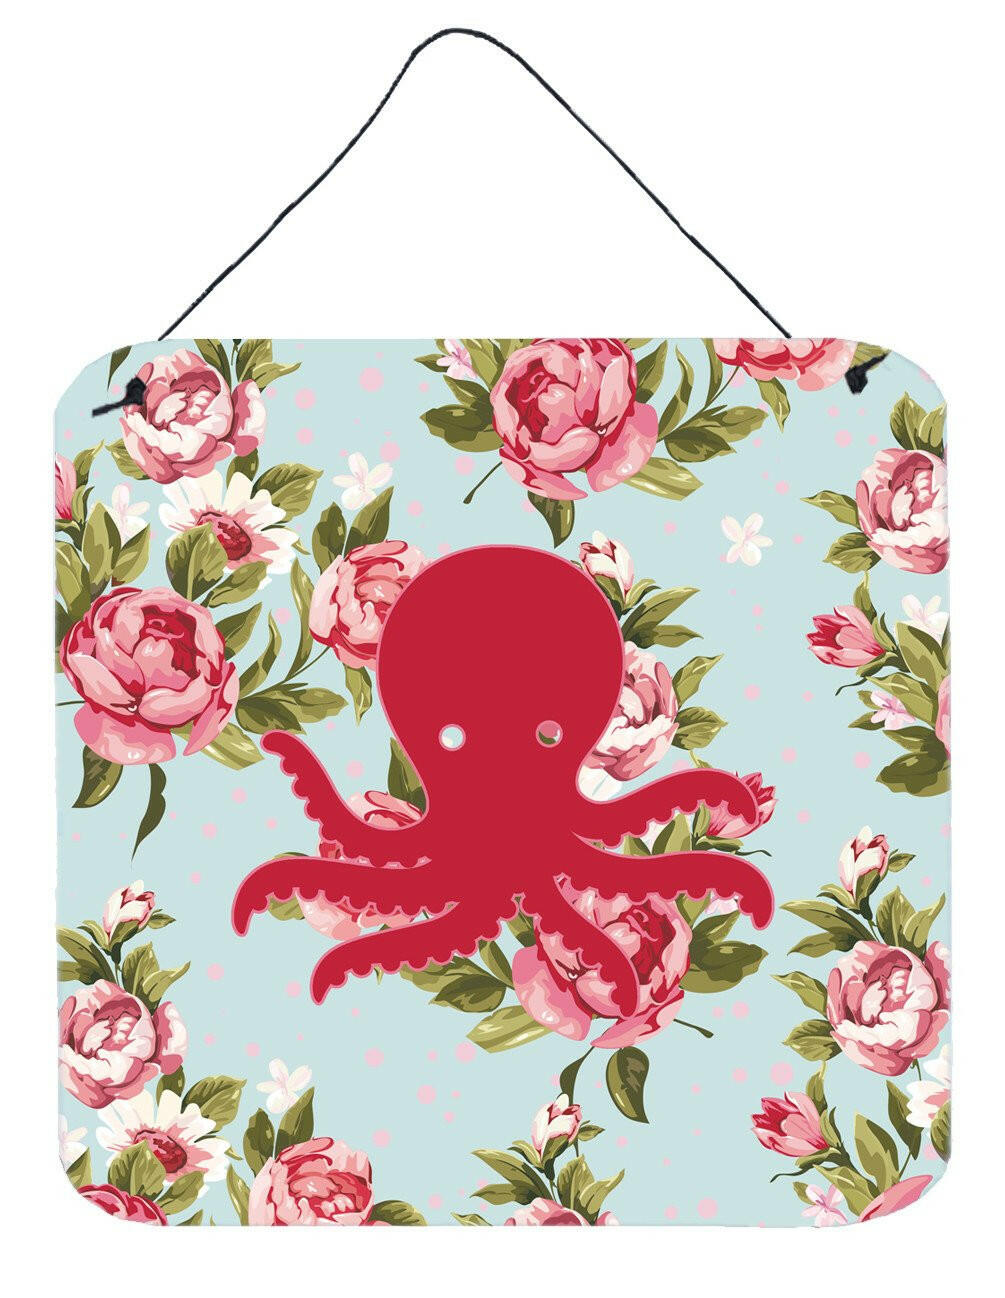 Octopus Shabby Chic Blue Roses Wall or Door Hanging Prints BB1090 by Caroline's Treasures